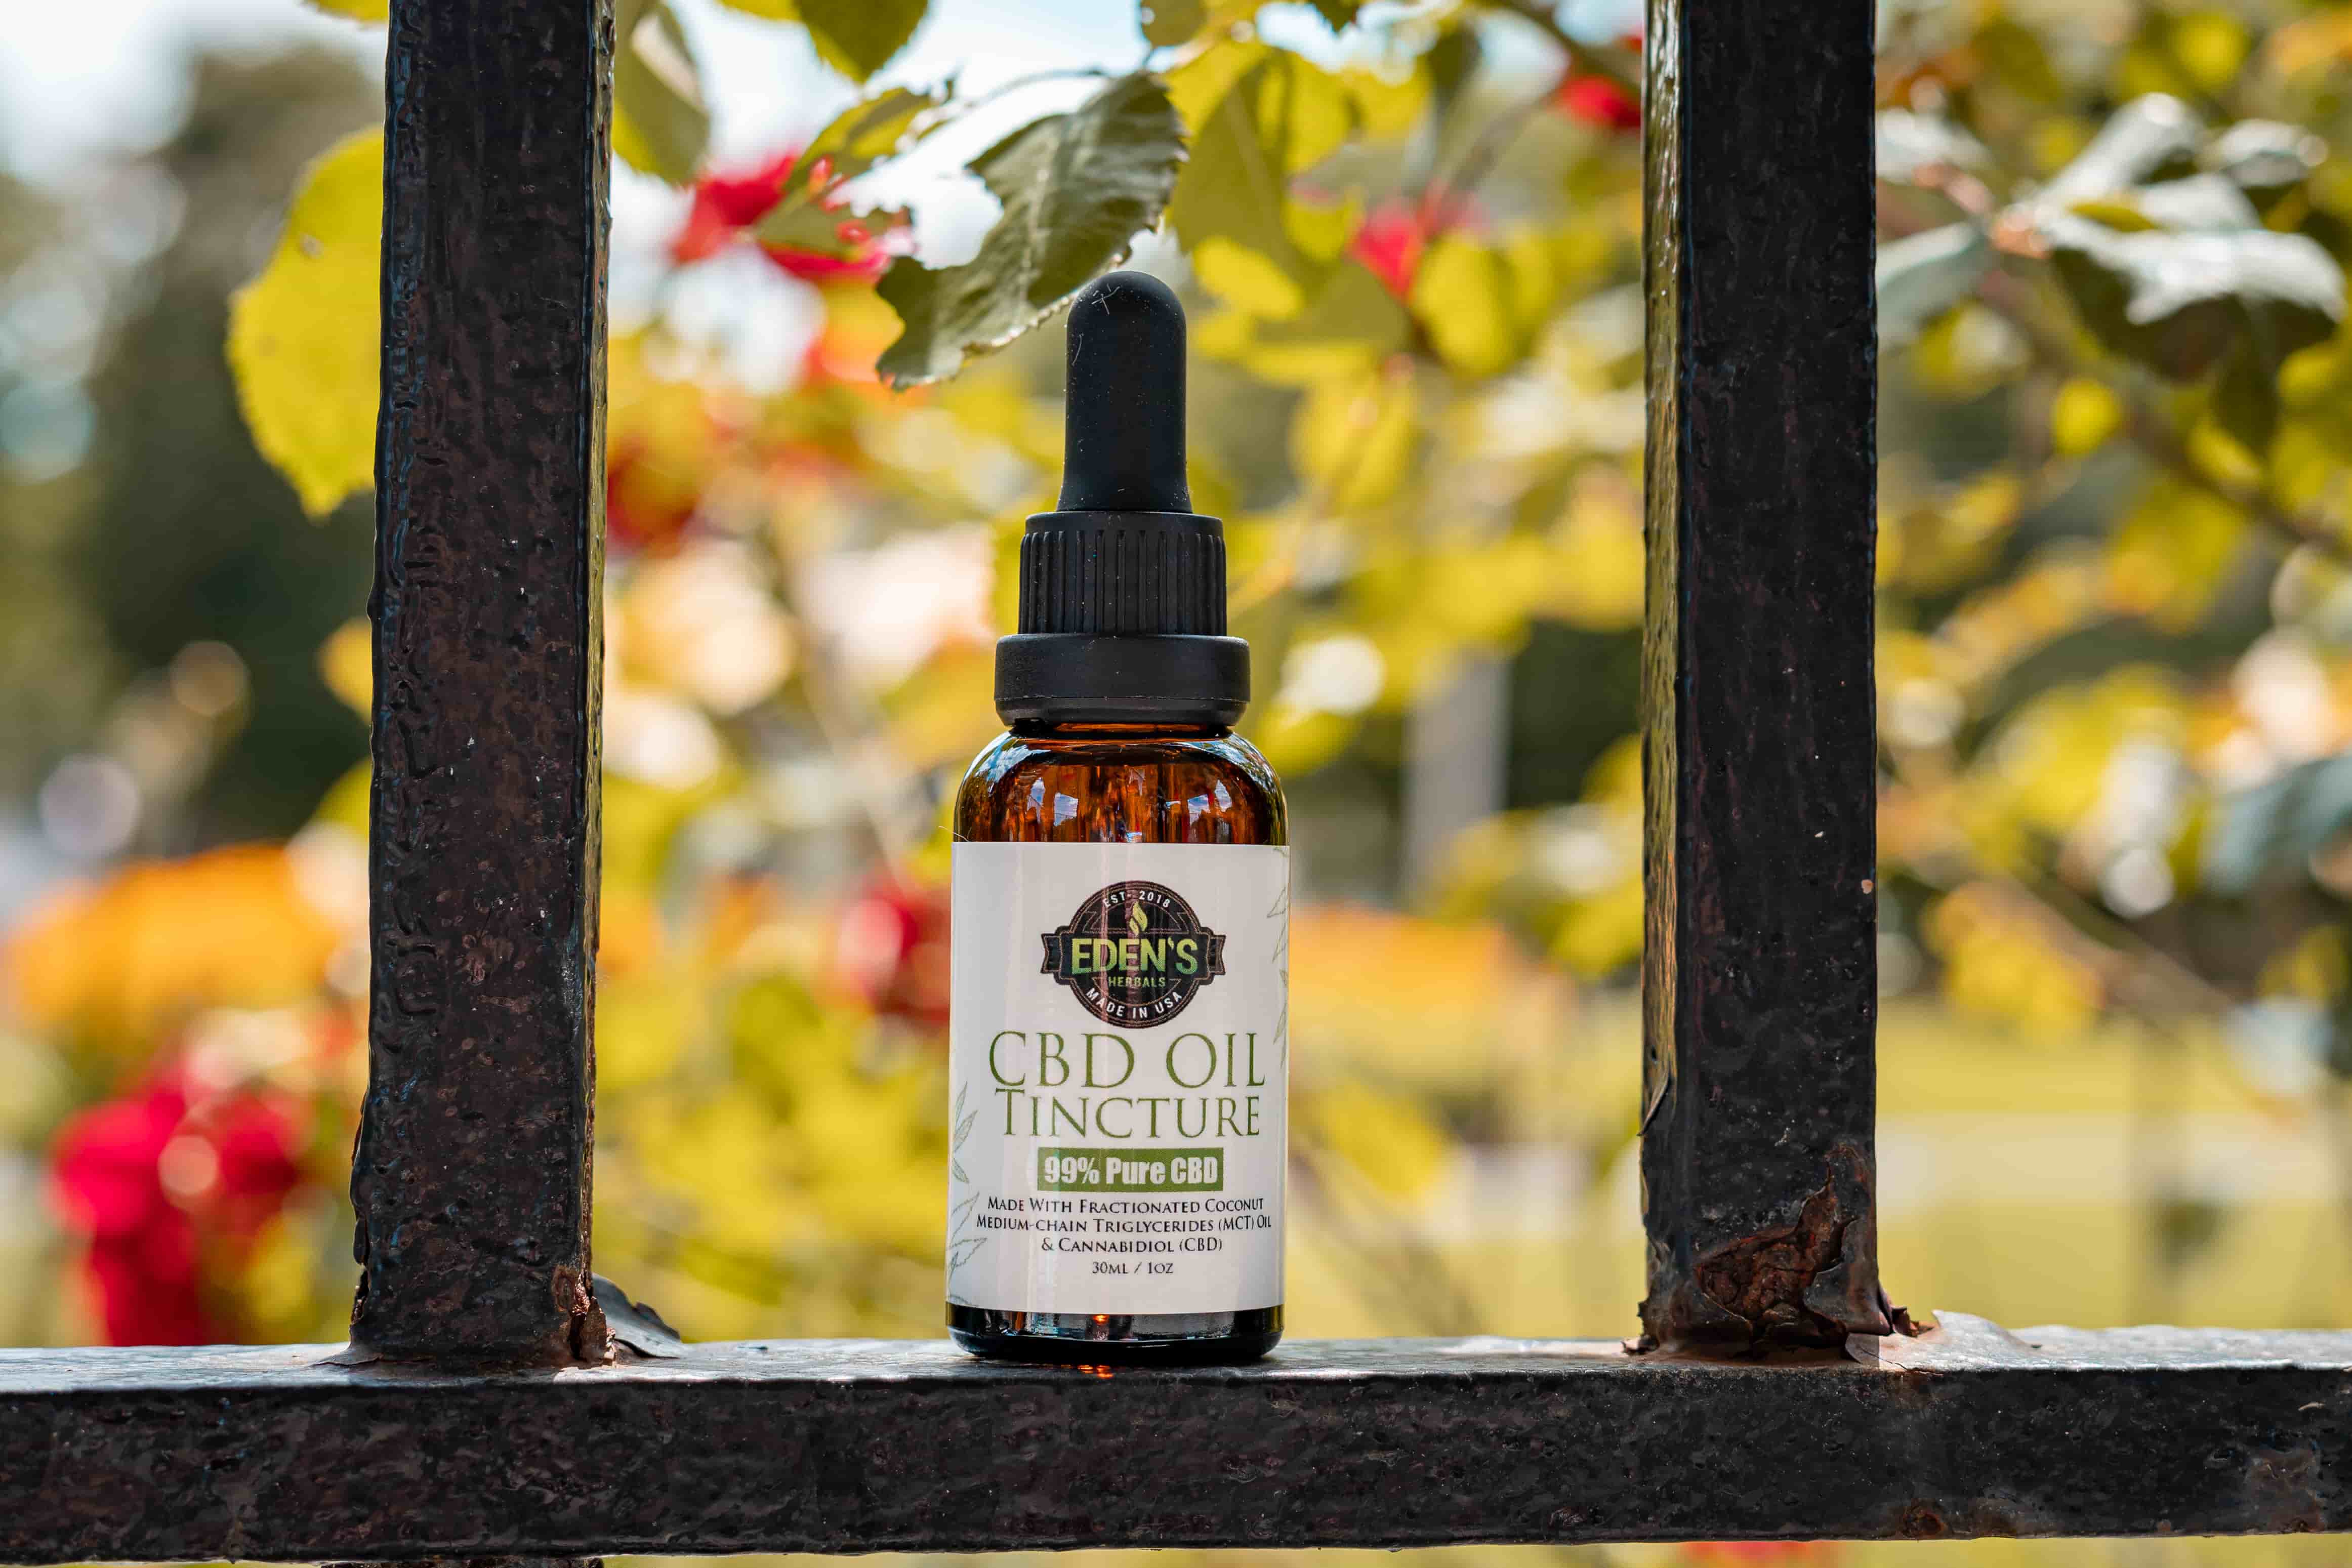 Eden's Herbals CBD Oil Tincture sitting on metal railing with flowers in background